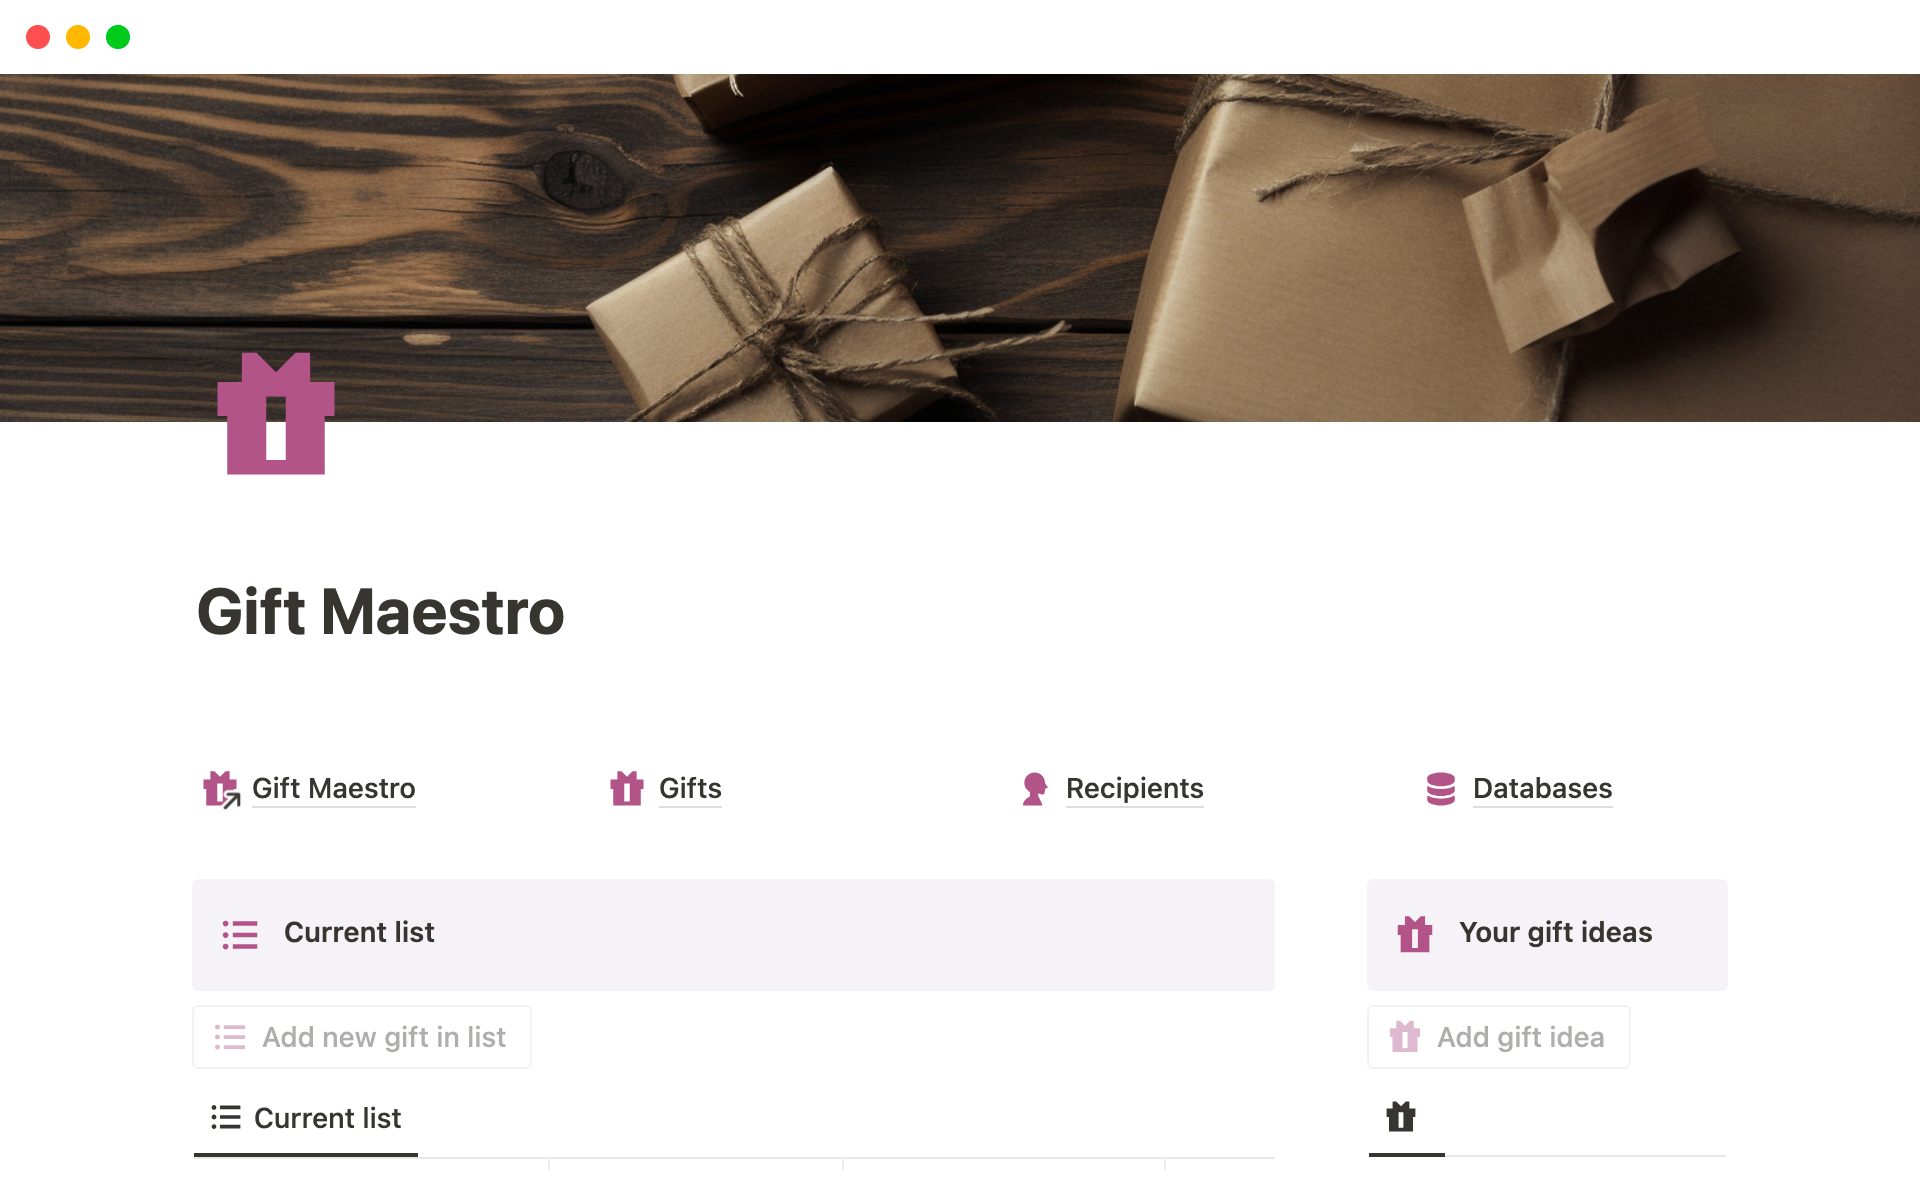 The Gift Maestro is an ingenious Notion template that streamlines and organizes your gift-giving process by tracking gifts, recipients, occasions, and upcoming birthdays, all in one visually appealing dashboard.